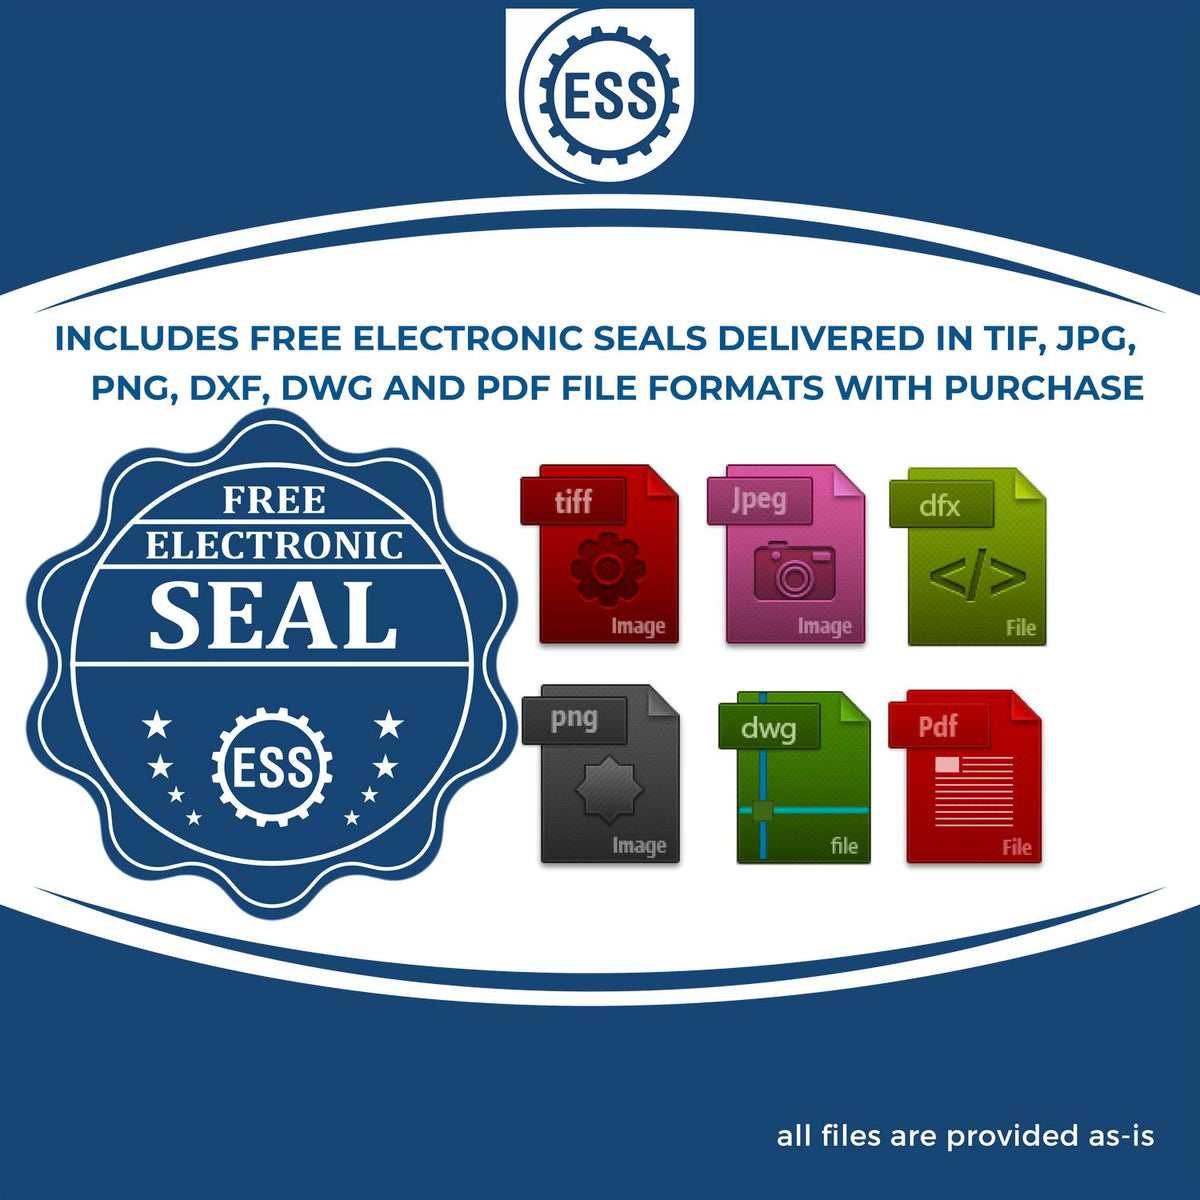 An infographic for the free electronic seal for the State of Vermont Long Reach Architectural Embossing Seal illustrating the different file type icons such as DXF, DWG, TIF, JPG and PNG.